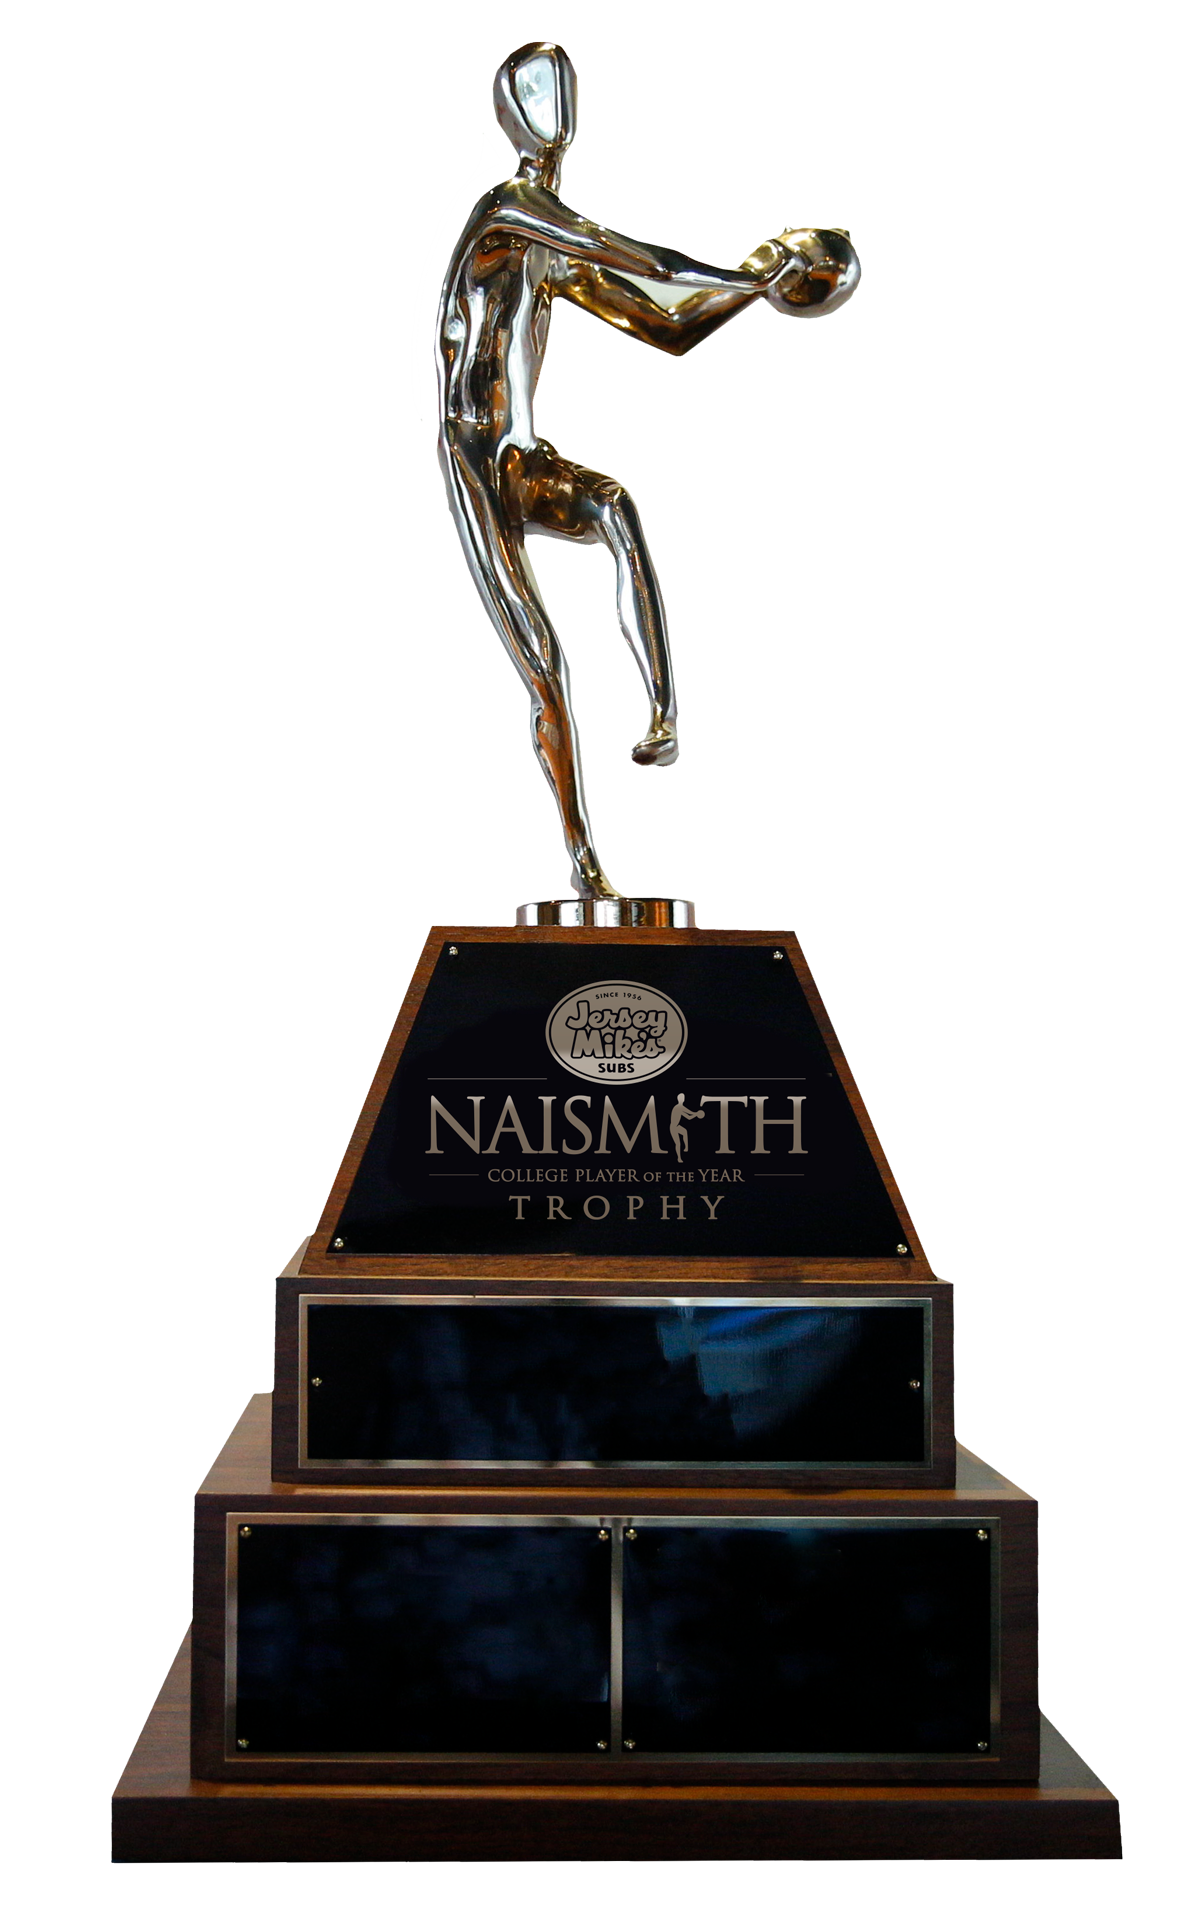 Jersey Mike's Naismith Trophy